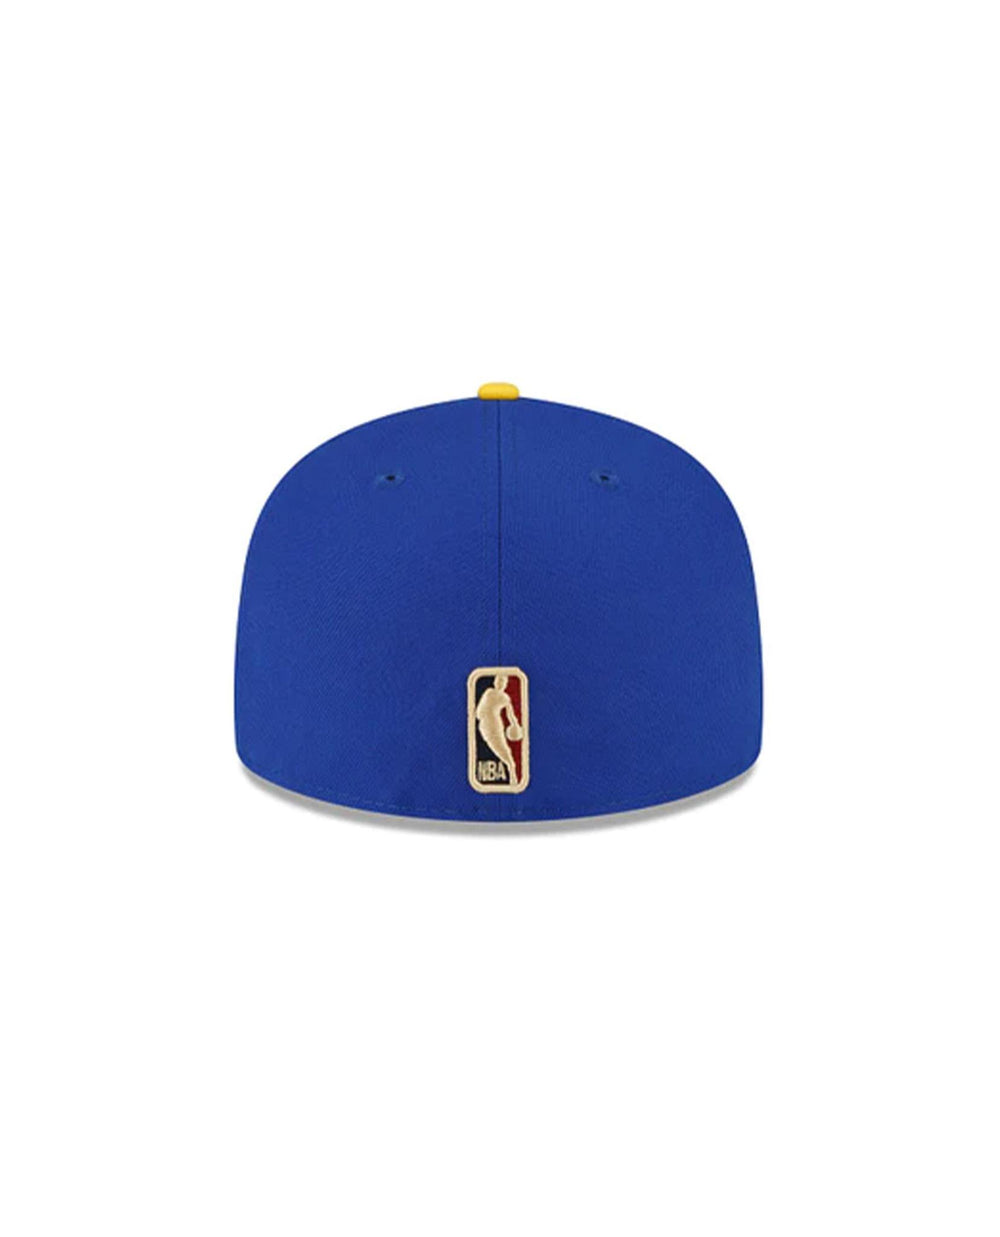 NWS Golden State Warriors New Era 59fifty Low Crown 7 3/4 NBA